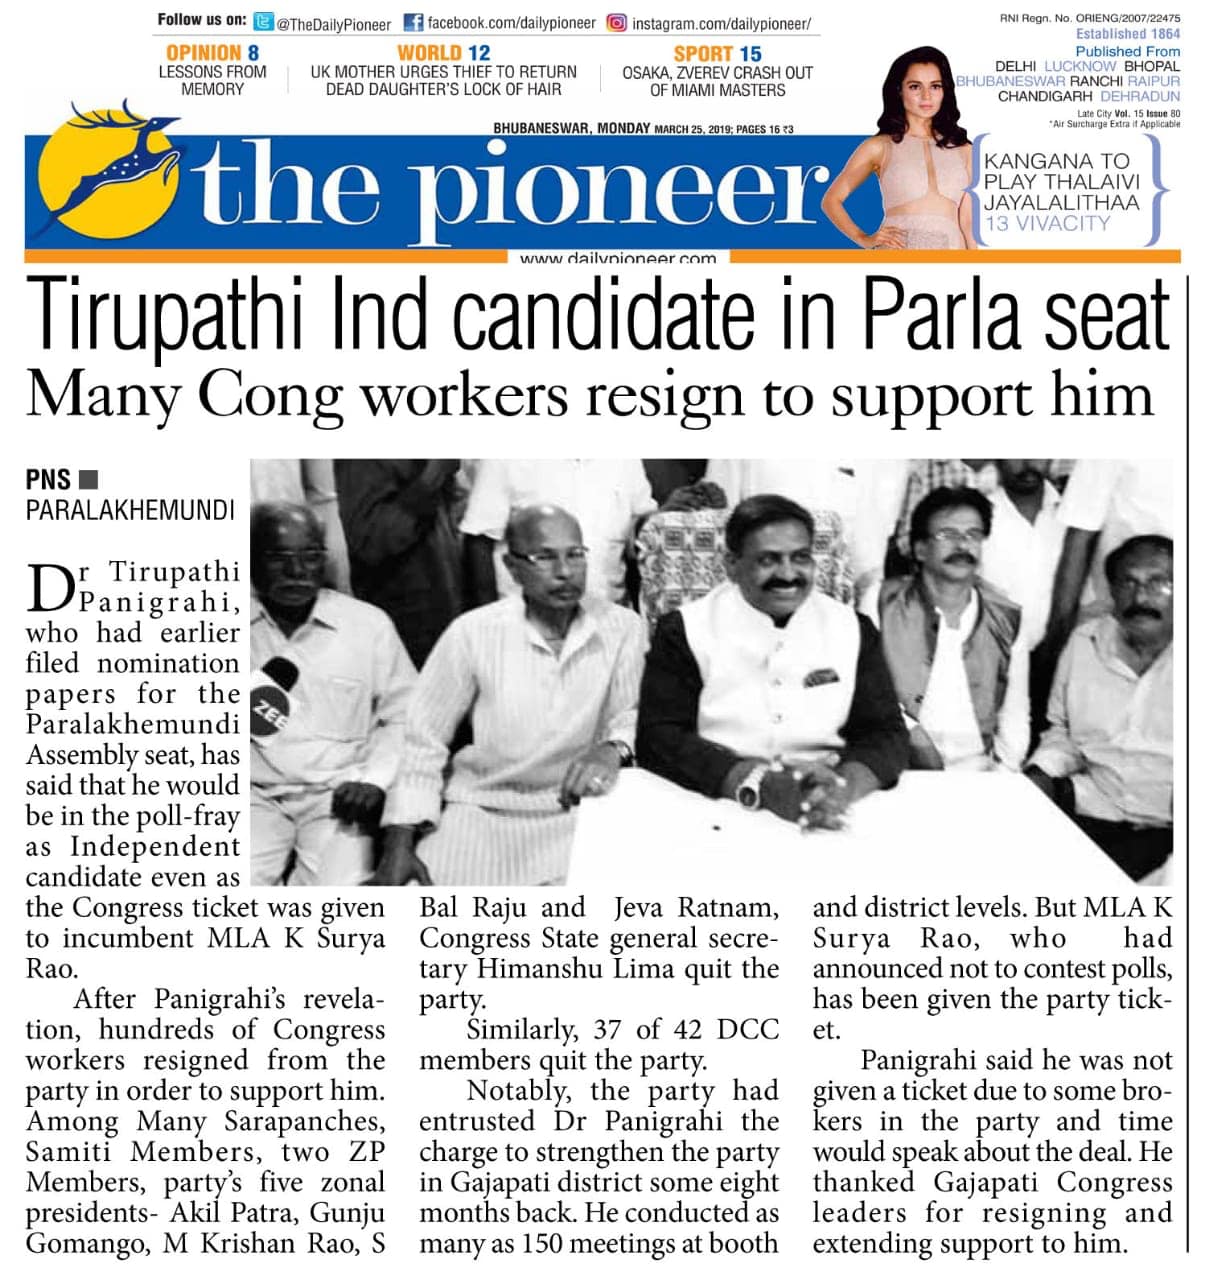 Many Congress worker resign to support Dr. Tirupati Panigrahis